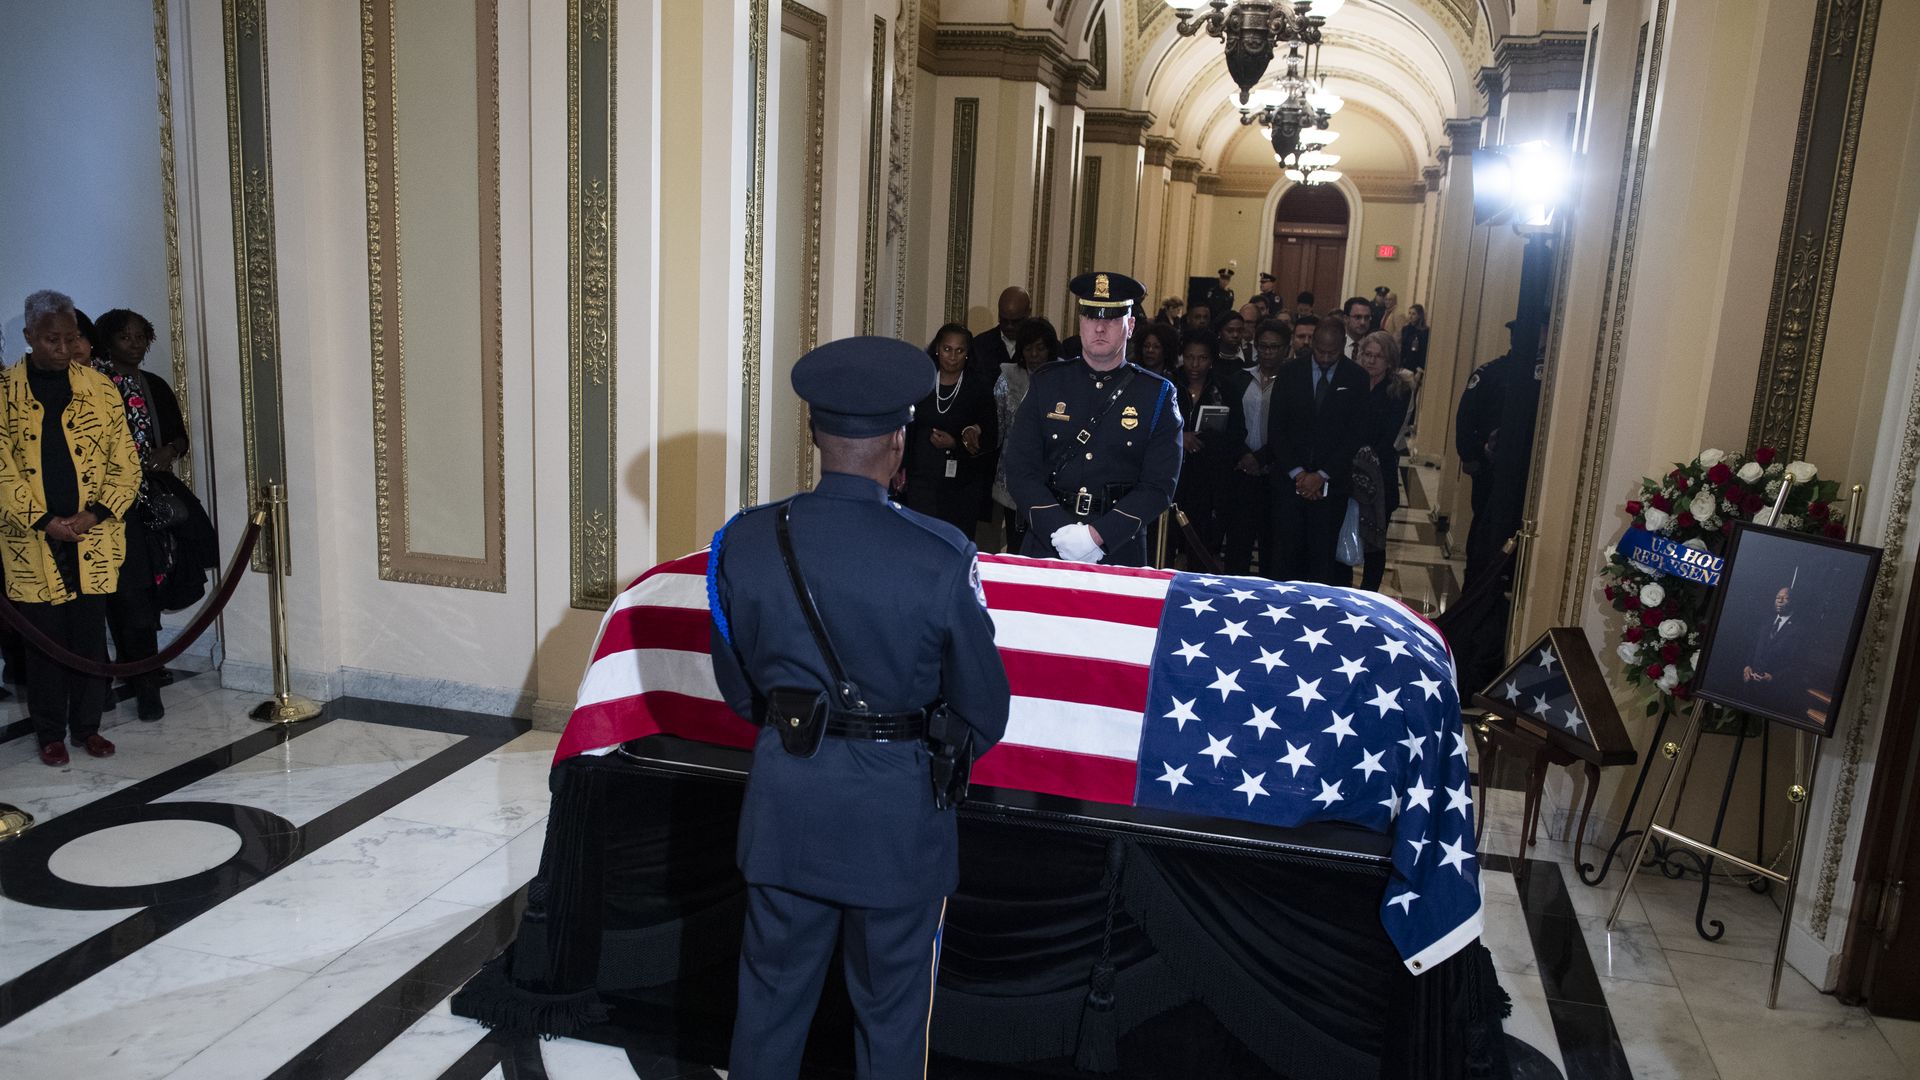 Guests pay respects to the late Rep. Elijah Cummings as his remains lie in state outside the House Chamber of the U.S. Capitol October 24, 2019 in Washington, D.C.